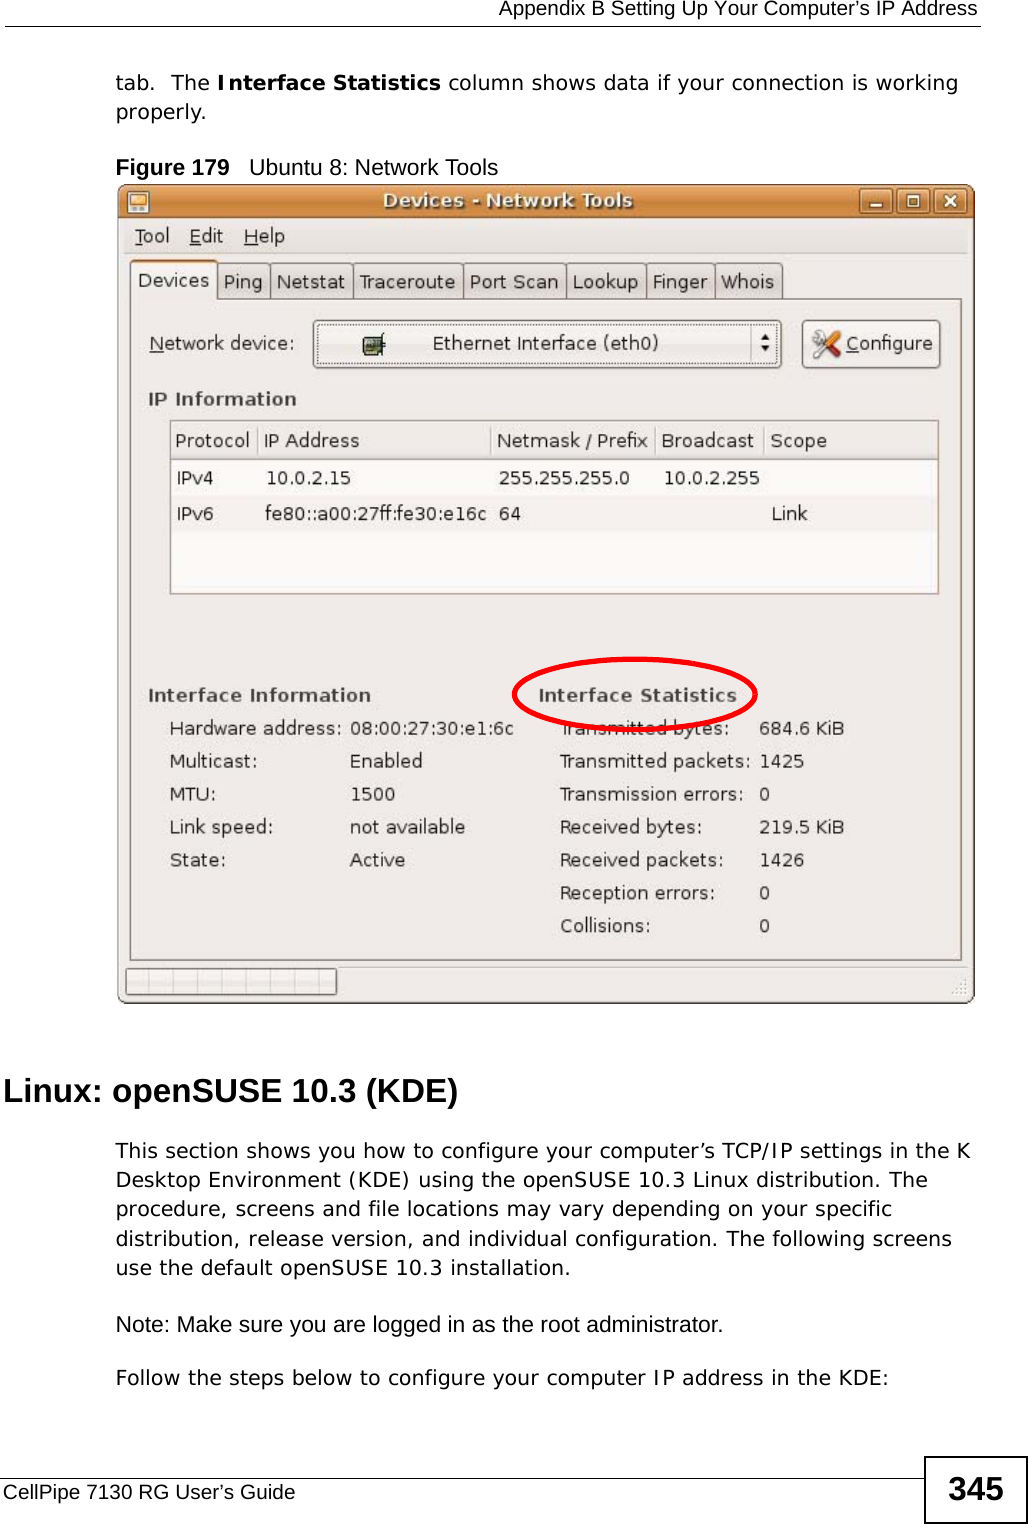  Appendix B Setting Up Your Computer’s IP AddressCellPipe 7130 RG User’s Guide 345tab.  The Interface Statistics column shows data if your connection is working properly.Figure 179   Ubuntu 8: Network ToolsLinux: openSUSE 10.3 (KDE)This section shows you how to configure your computer’s TCP/IP settings in the K Desktop Environment (KDE) using the openSUSE 10.3 Linux distribution. The procedure, screens and file locations may vary depending on your specific distribution, release version, and individual configuration. The following screens use the default openSUSE 10.3 installation.Note: Make sure you are logged in as the root administrator. Follow the steps below to configure your computer IP address in the KDE: